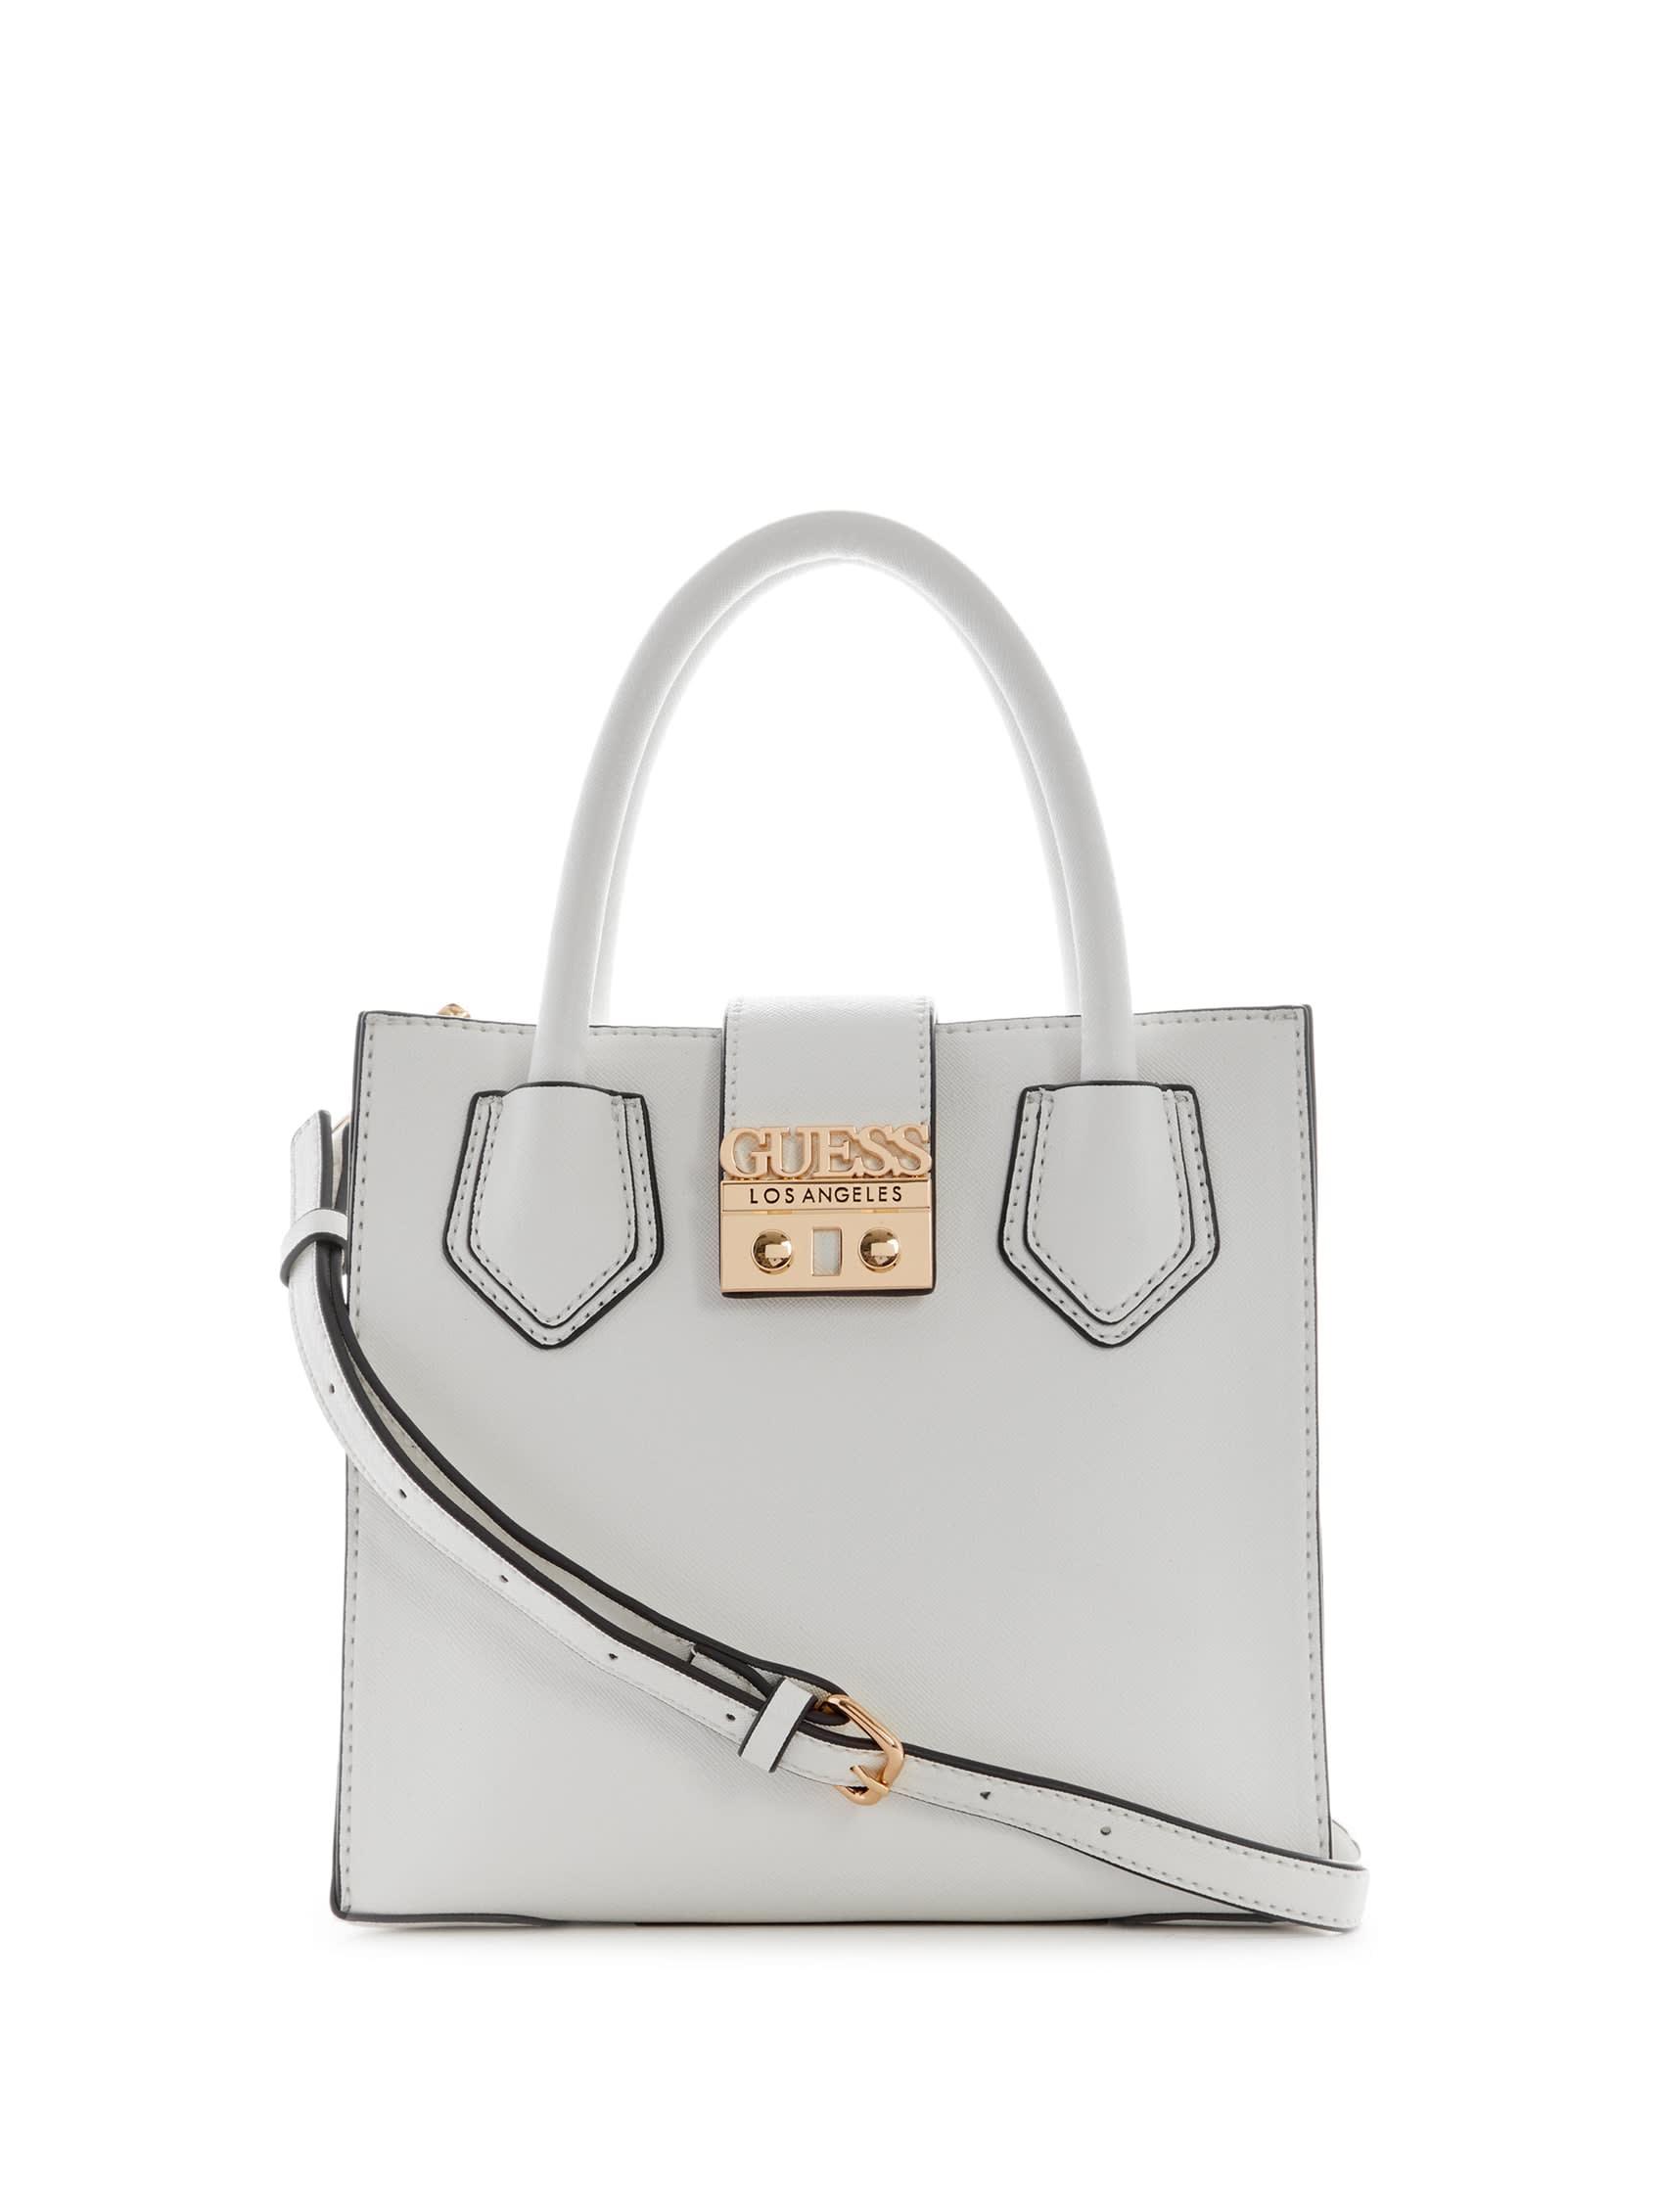 Guess Factory Blaise Small Satchel in White | Lyst